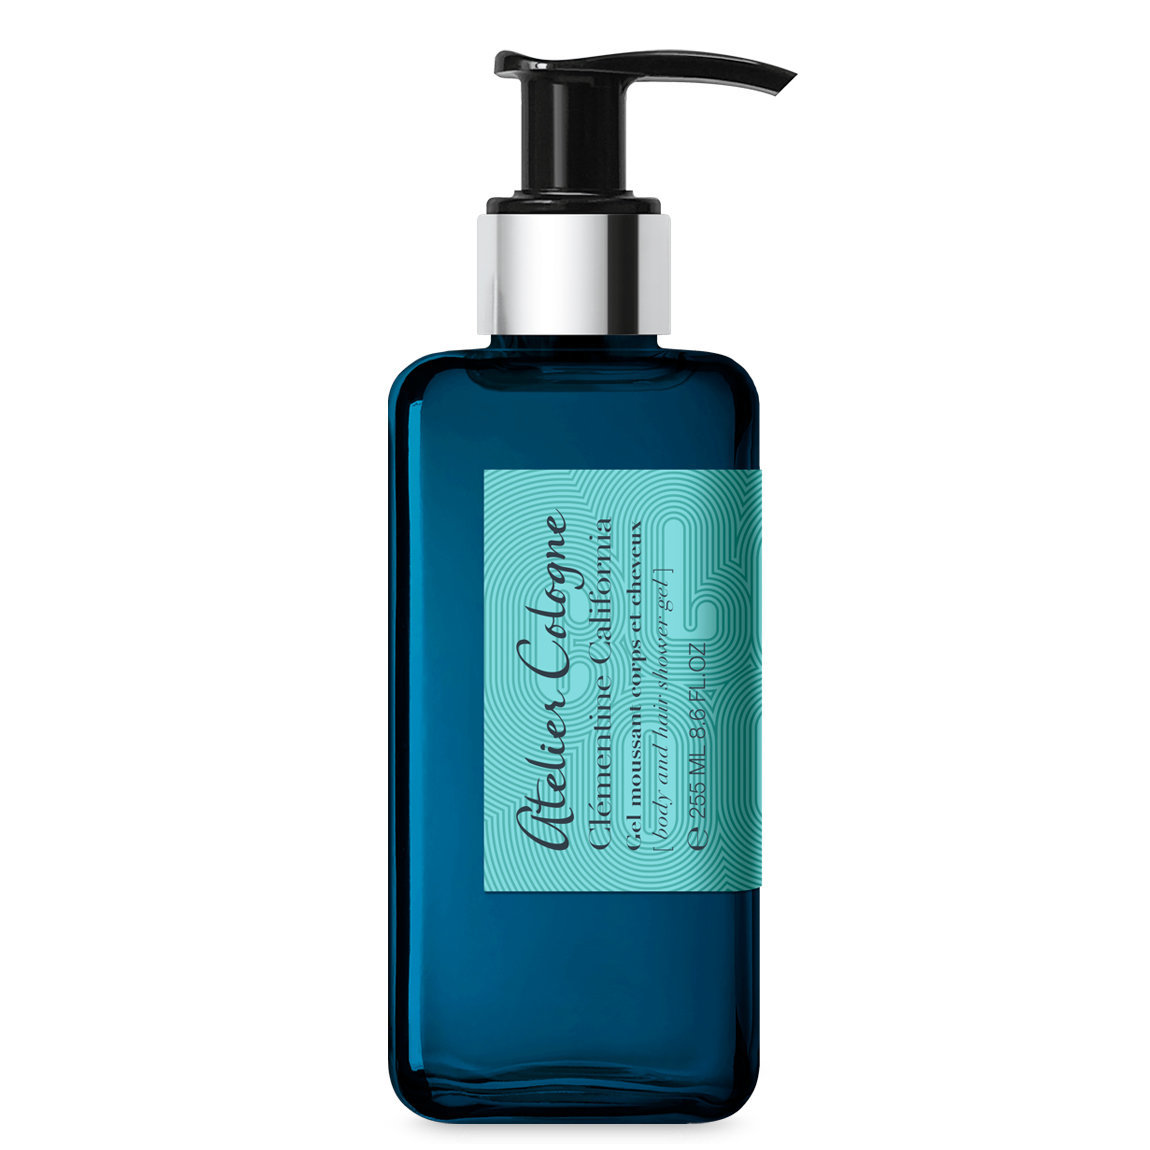 Atelier Cologne Clementine California Body & Hair Shower Gel alternative view 1 - product swatch.